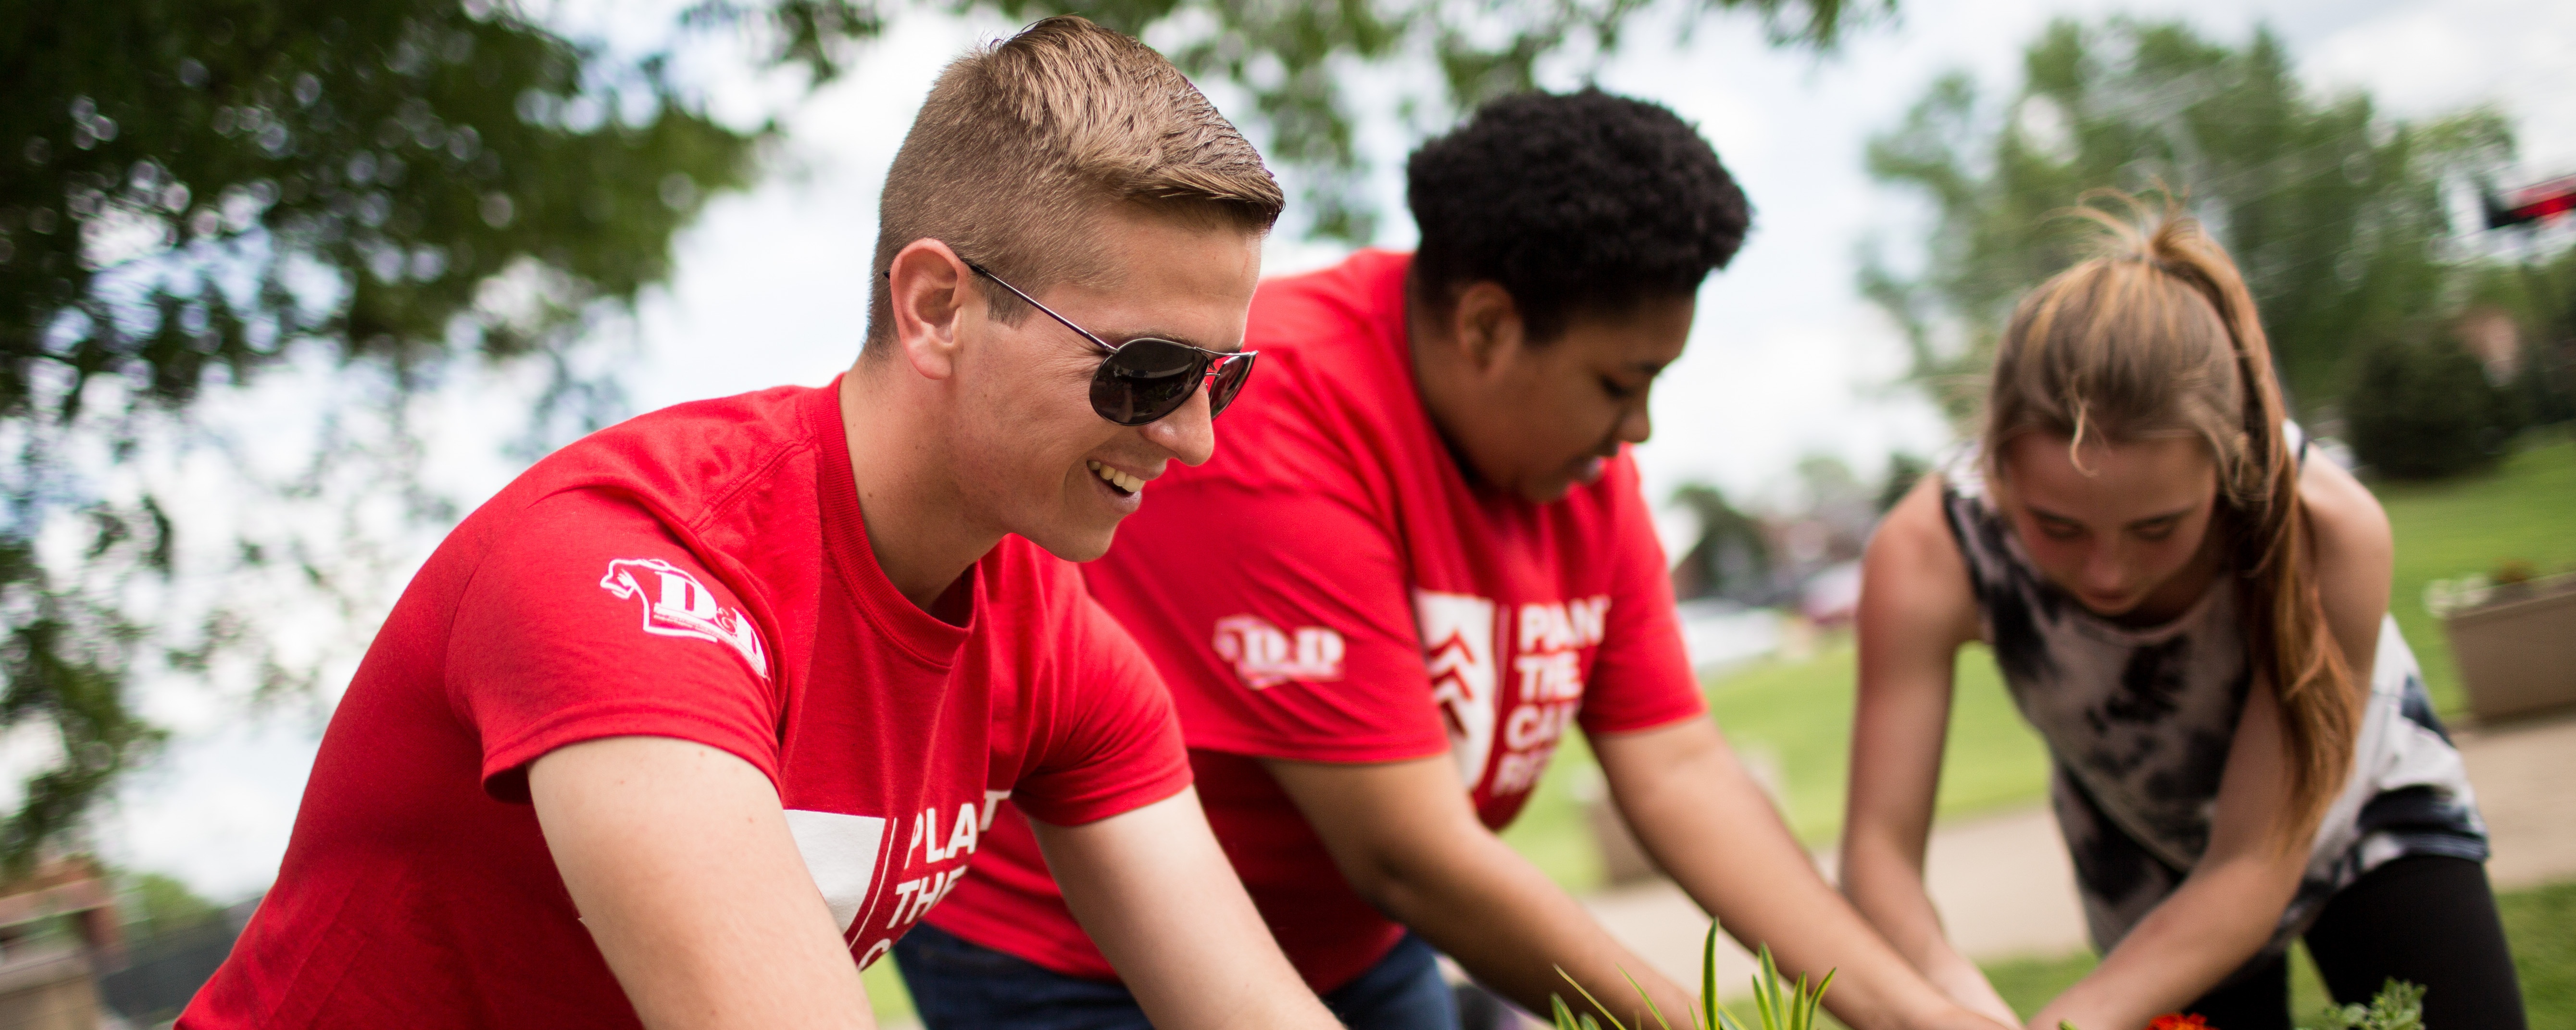 Students plant red plants in campus flowerbeds